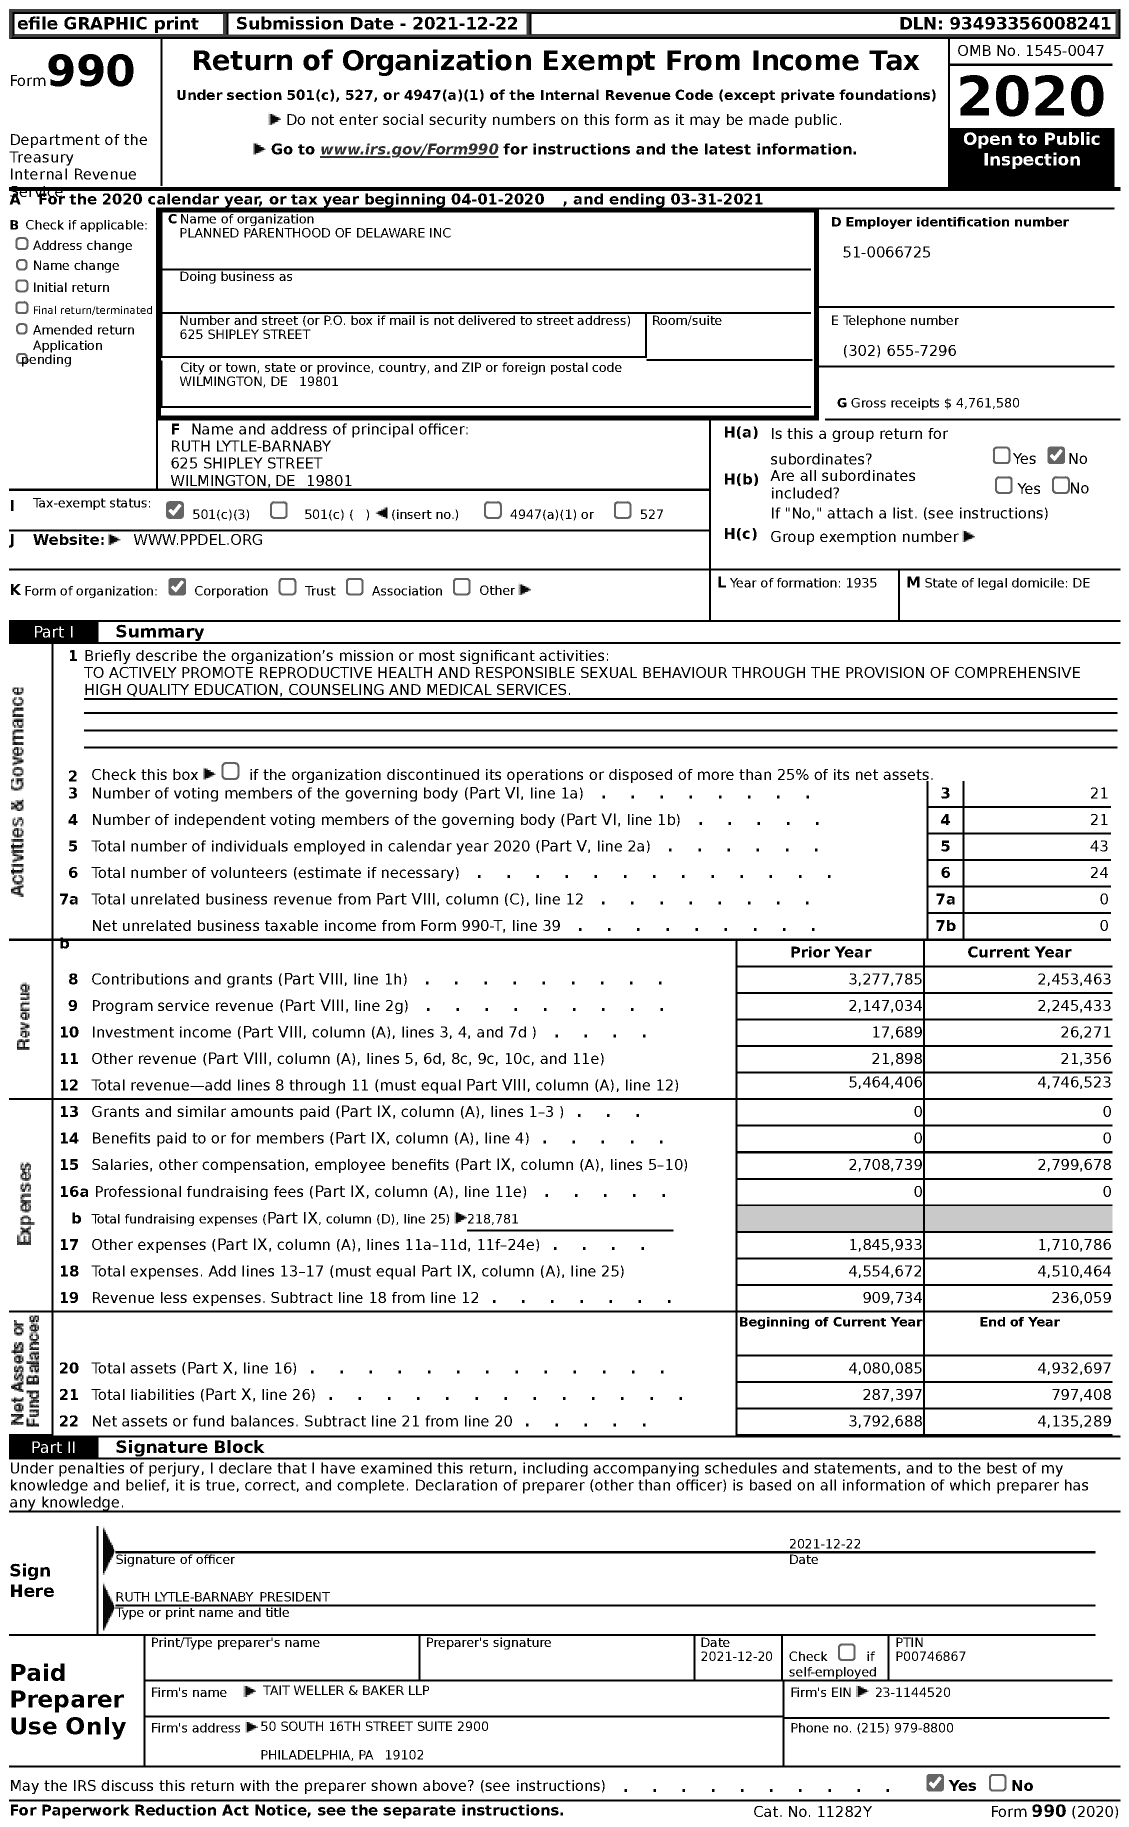 Image of first page of 2020 Form 990 for Planned Parenthood of Delaware